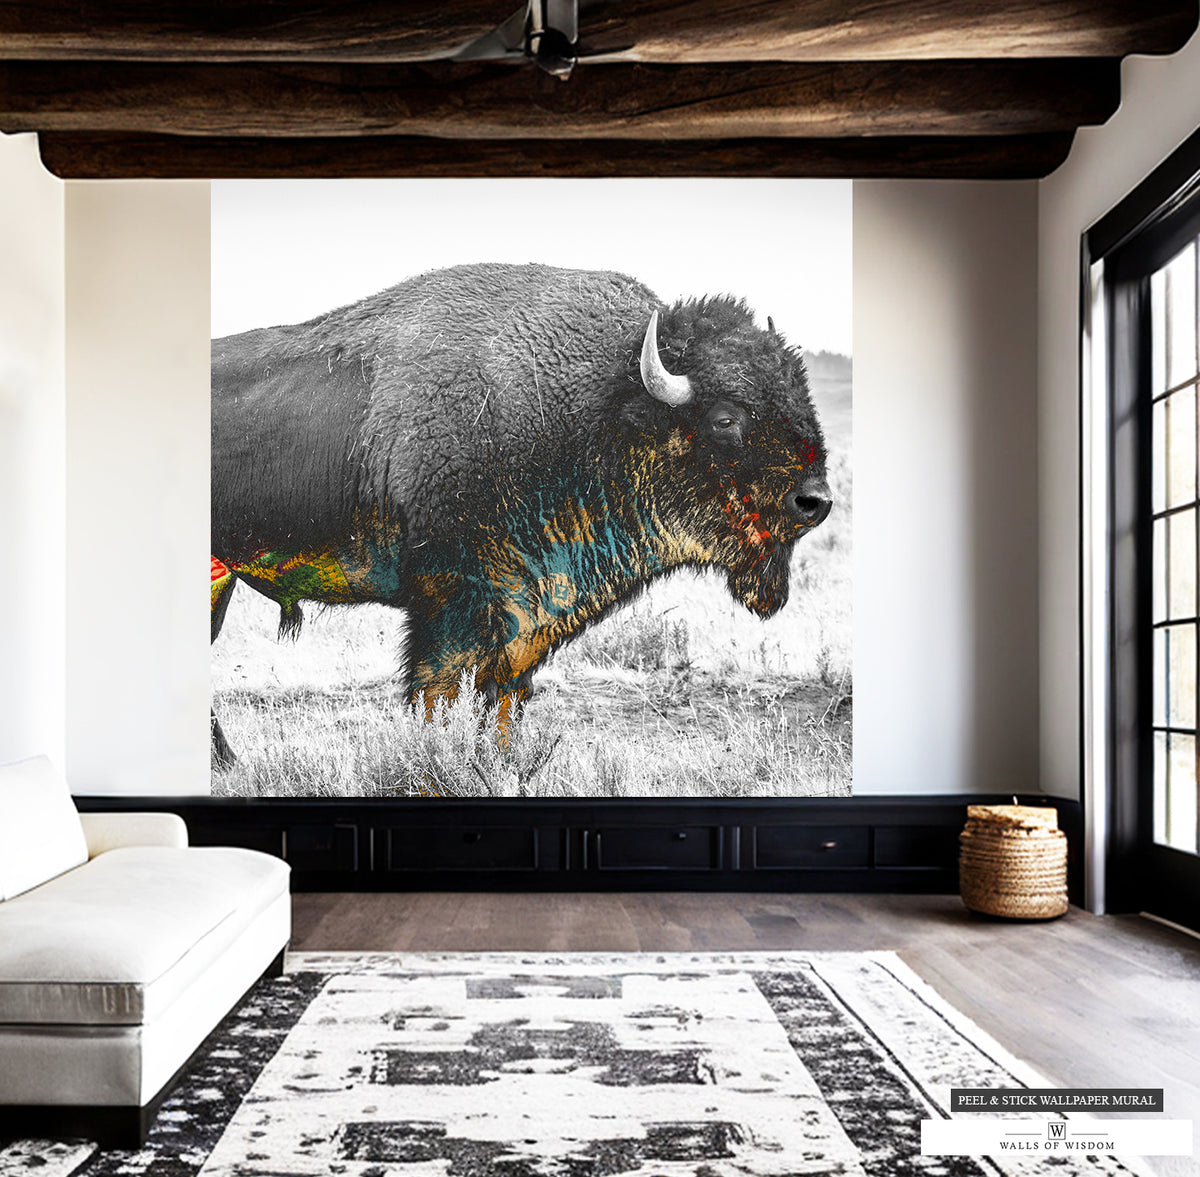 Apartment-friendly large wall mural featuring an American buffalo with Native accents.